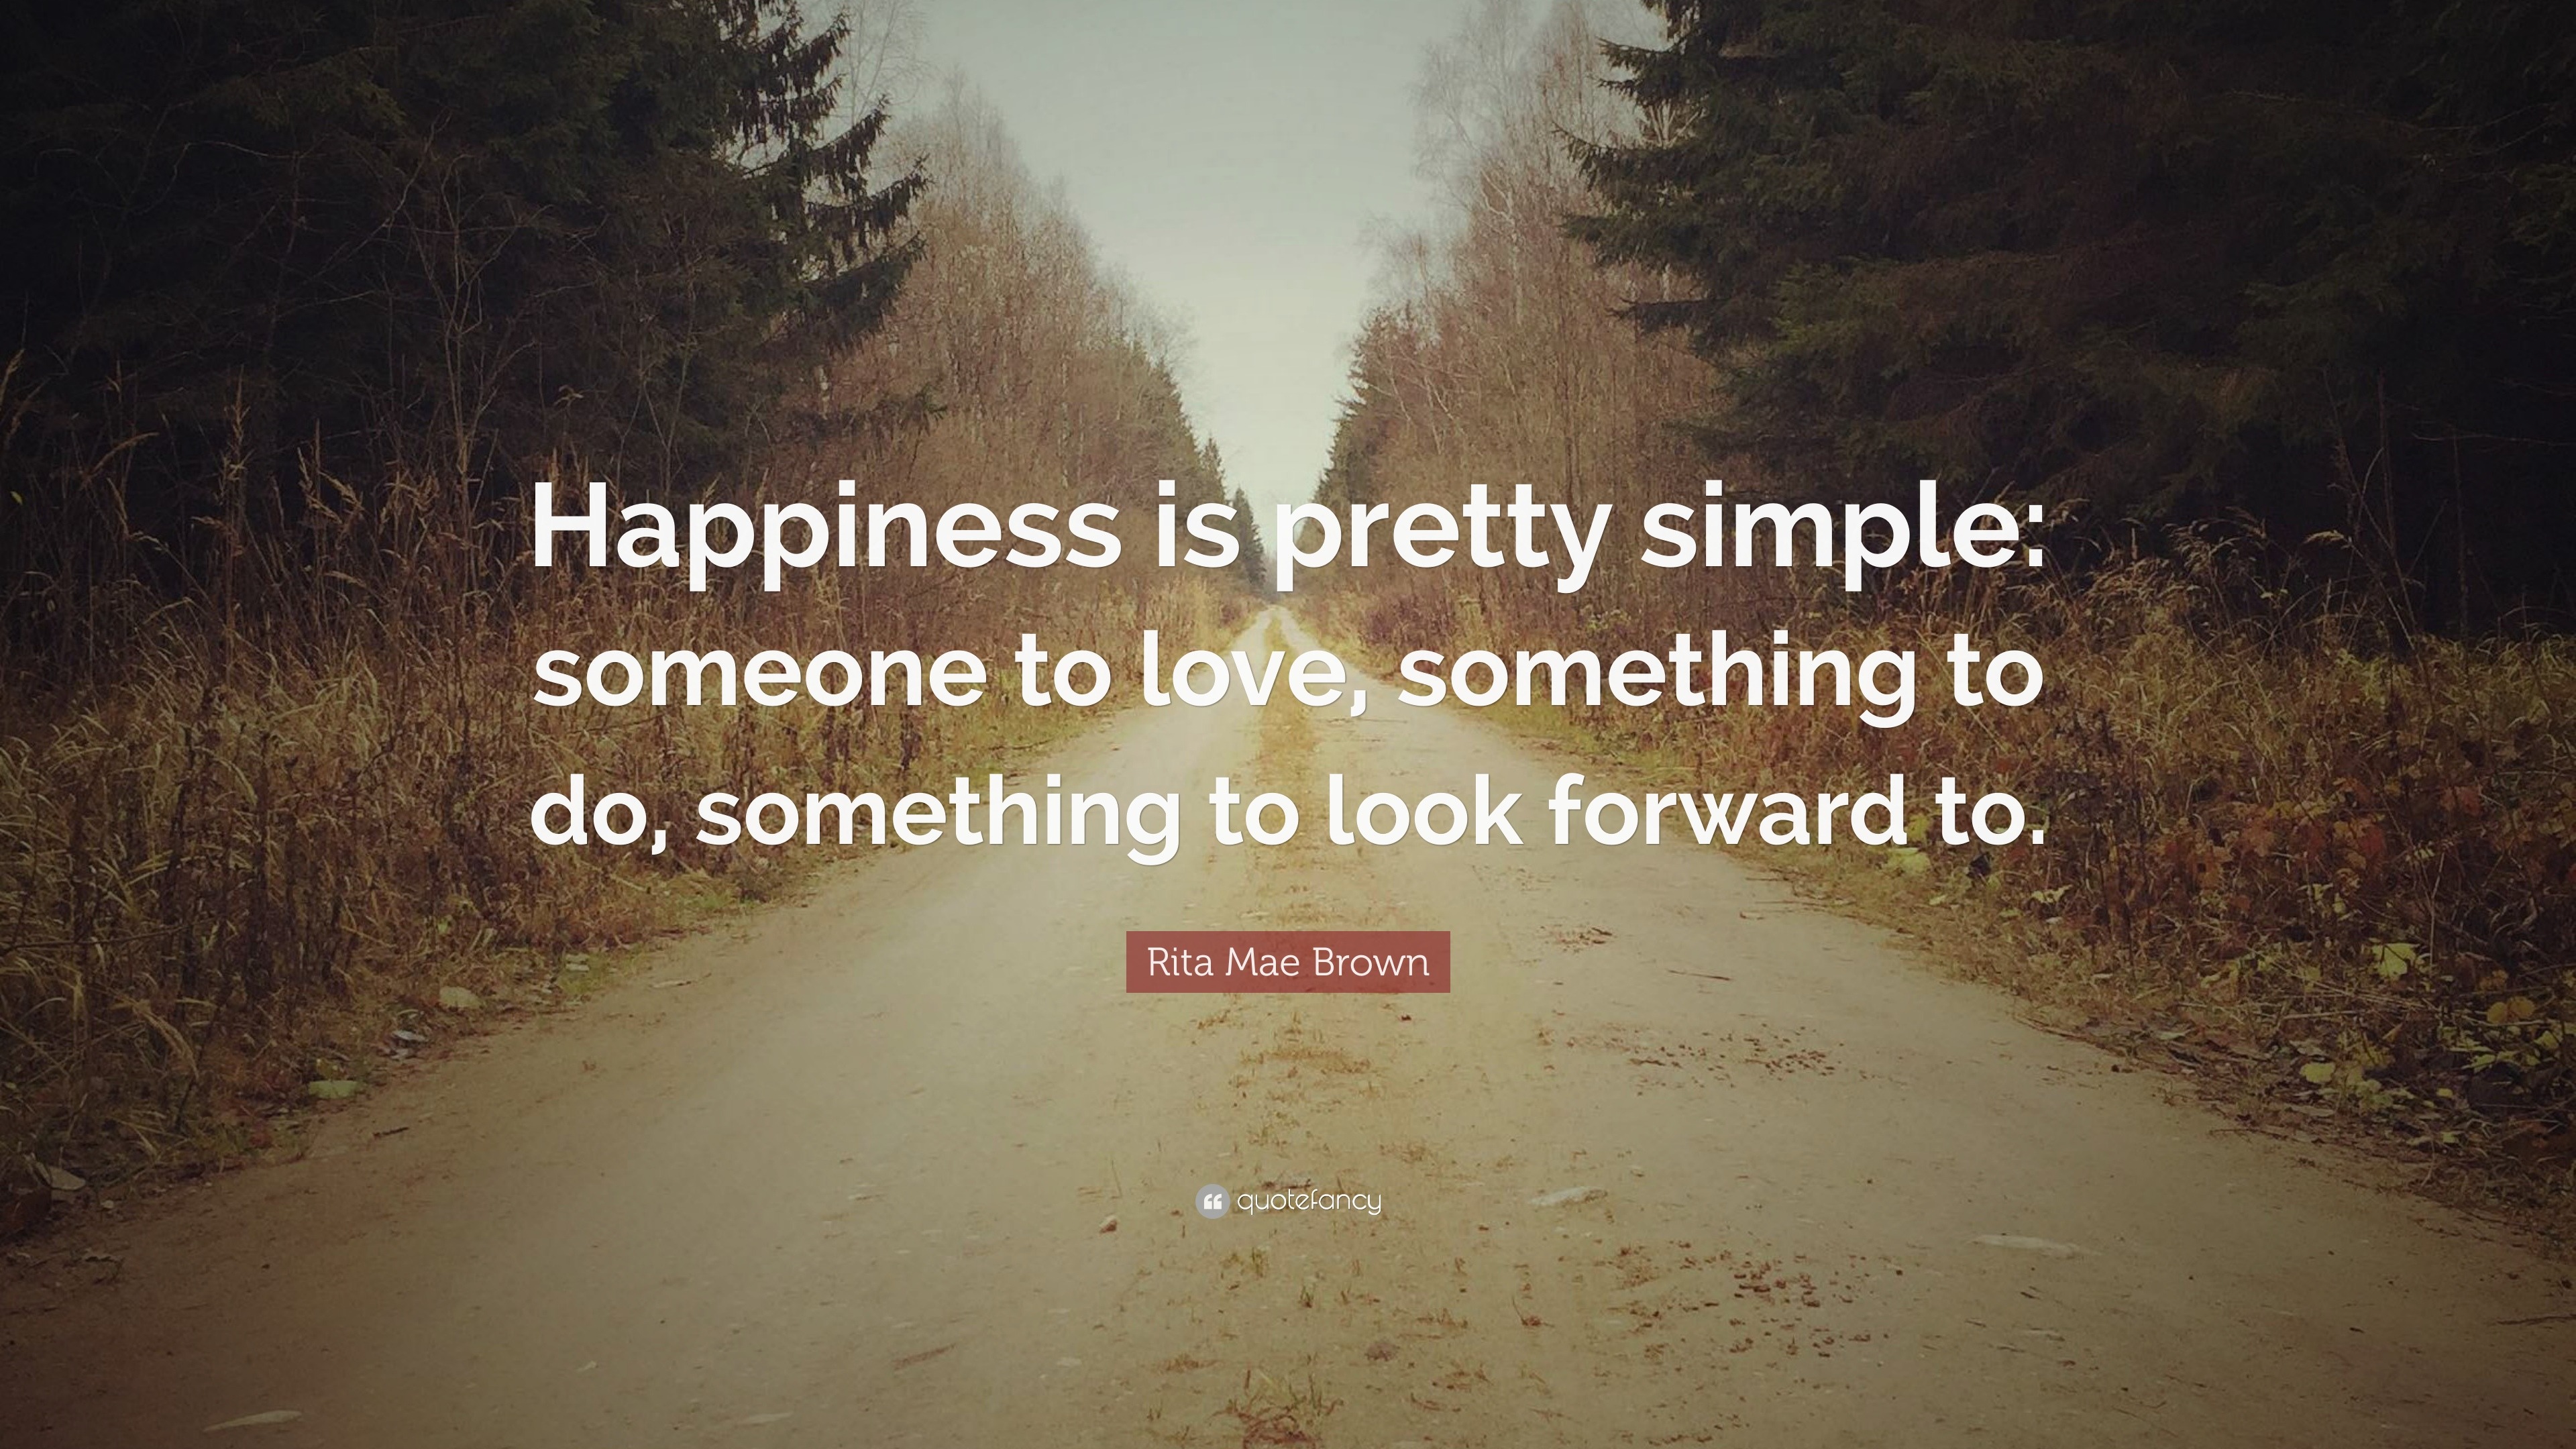 Rita Mae Brown Quote: “Happiness is pretty simple: someone to love